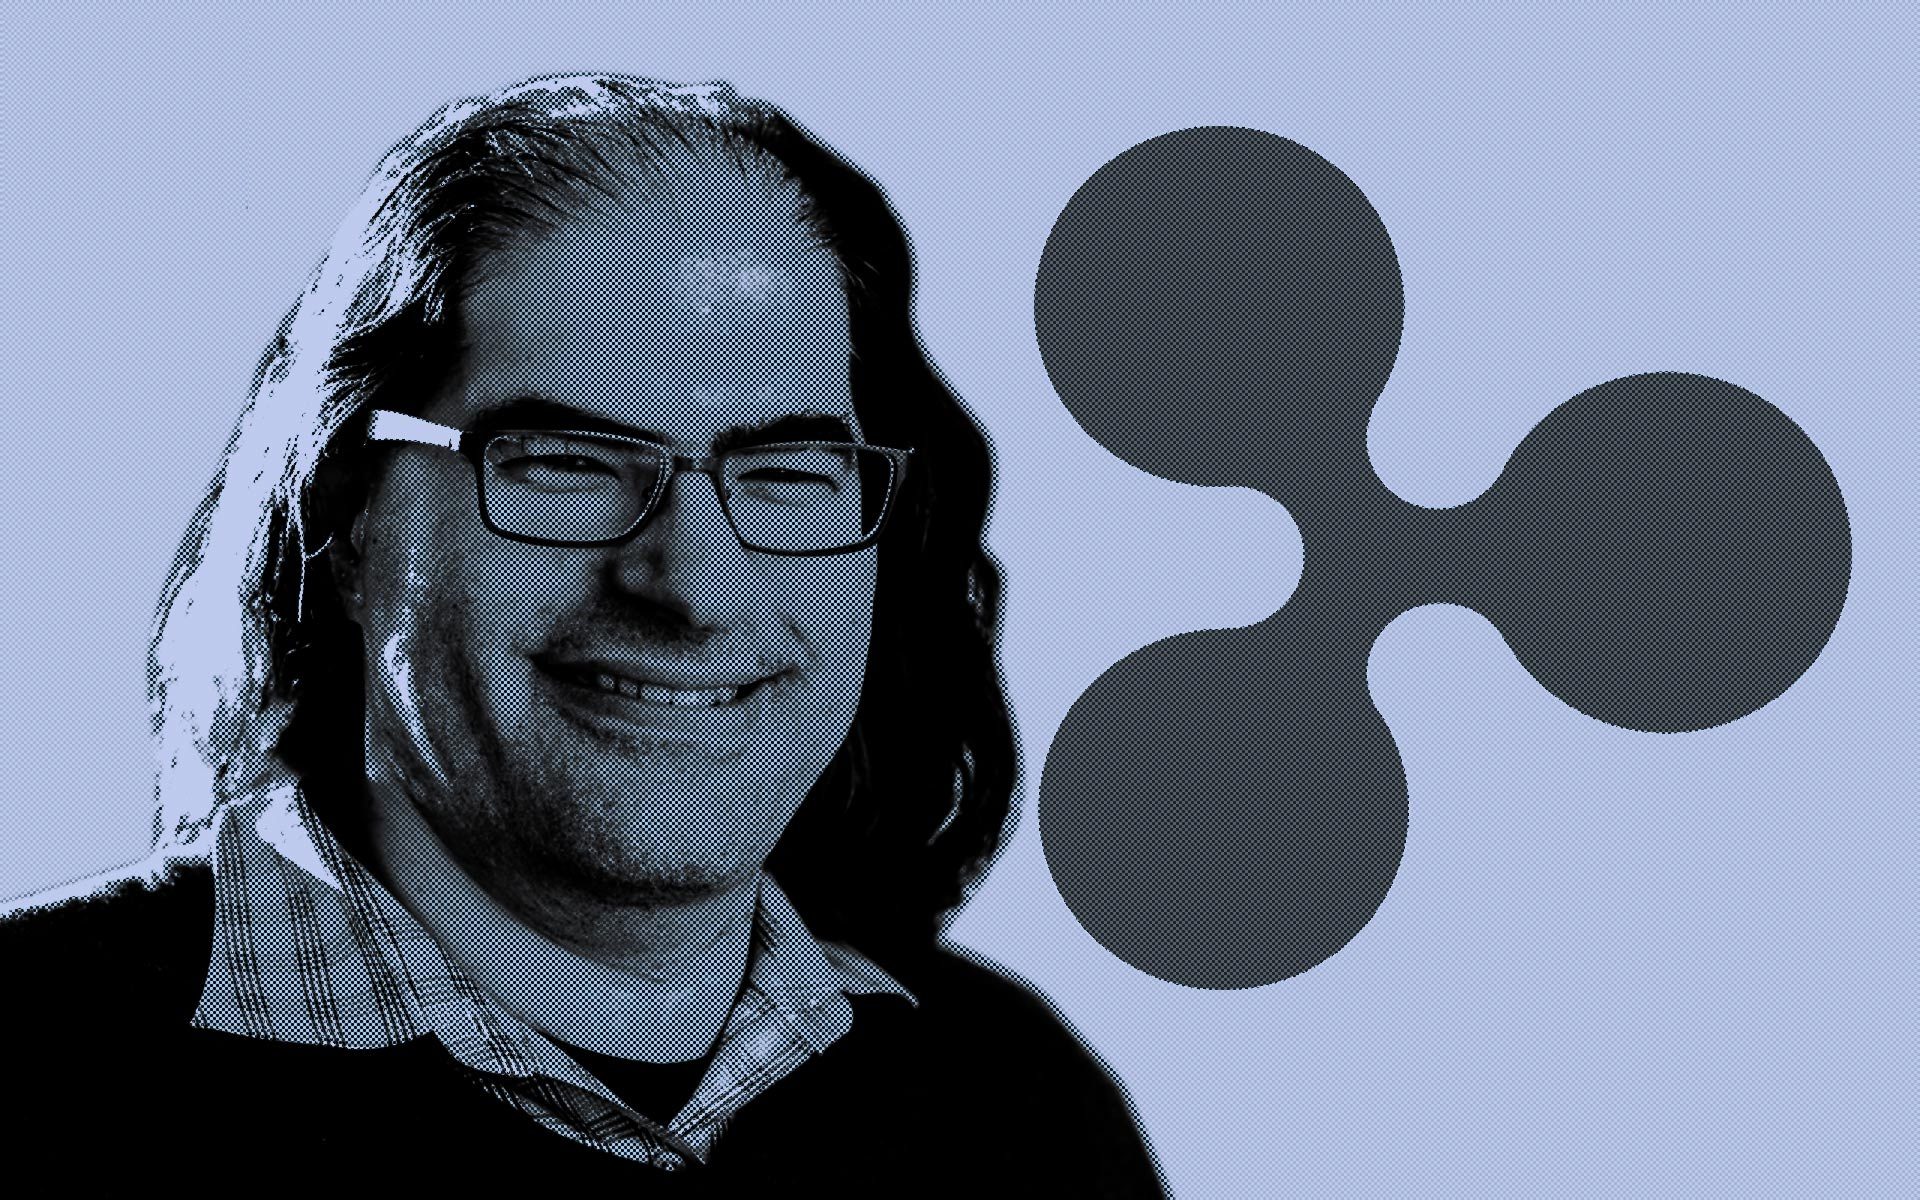 Ripple CTO: No, XRP Transactions Cannot be Blocked